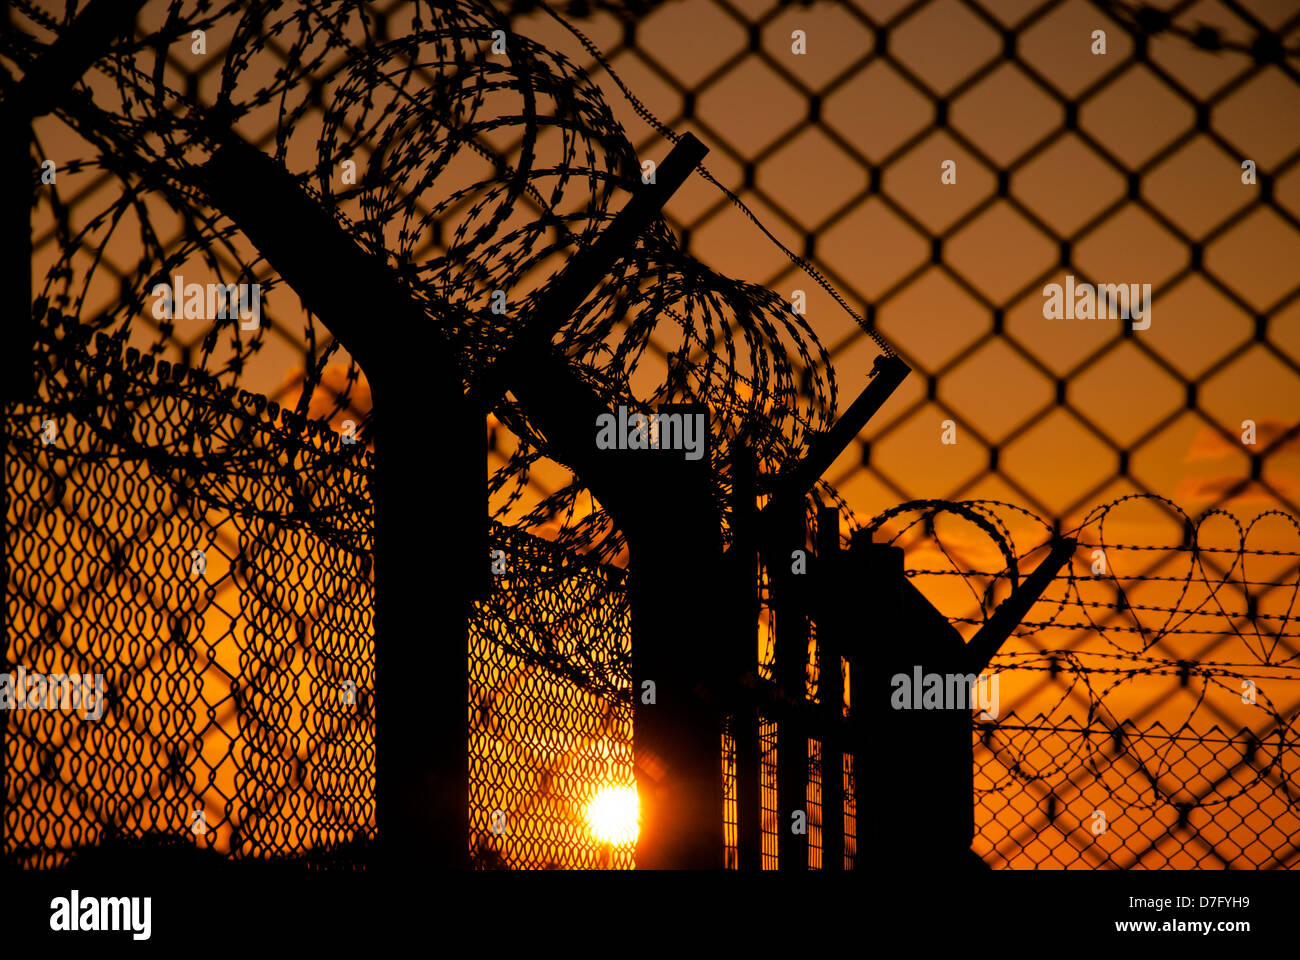 Razorwire and fencing at sunset Stock Photo